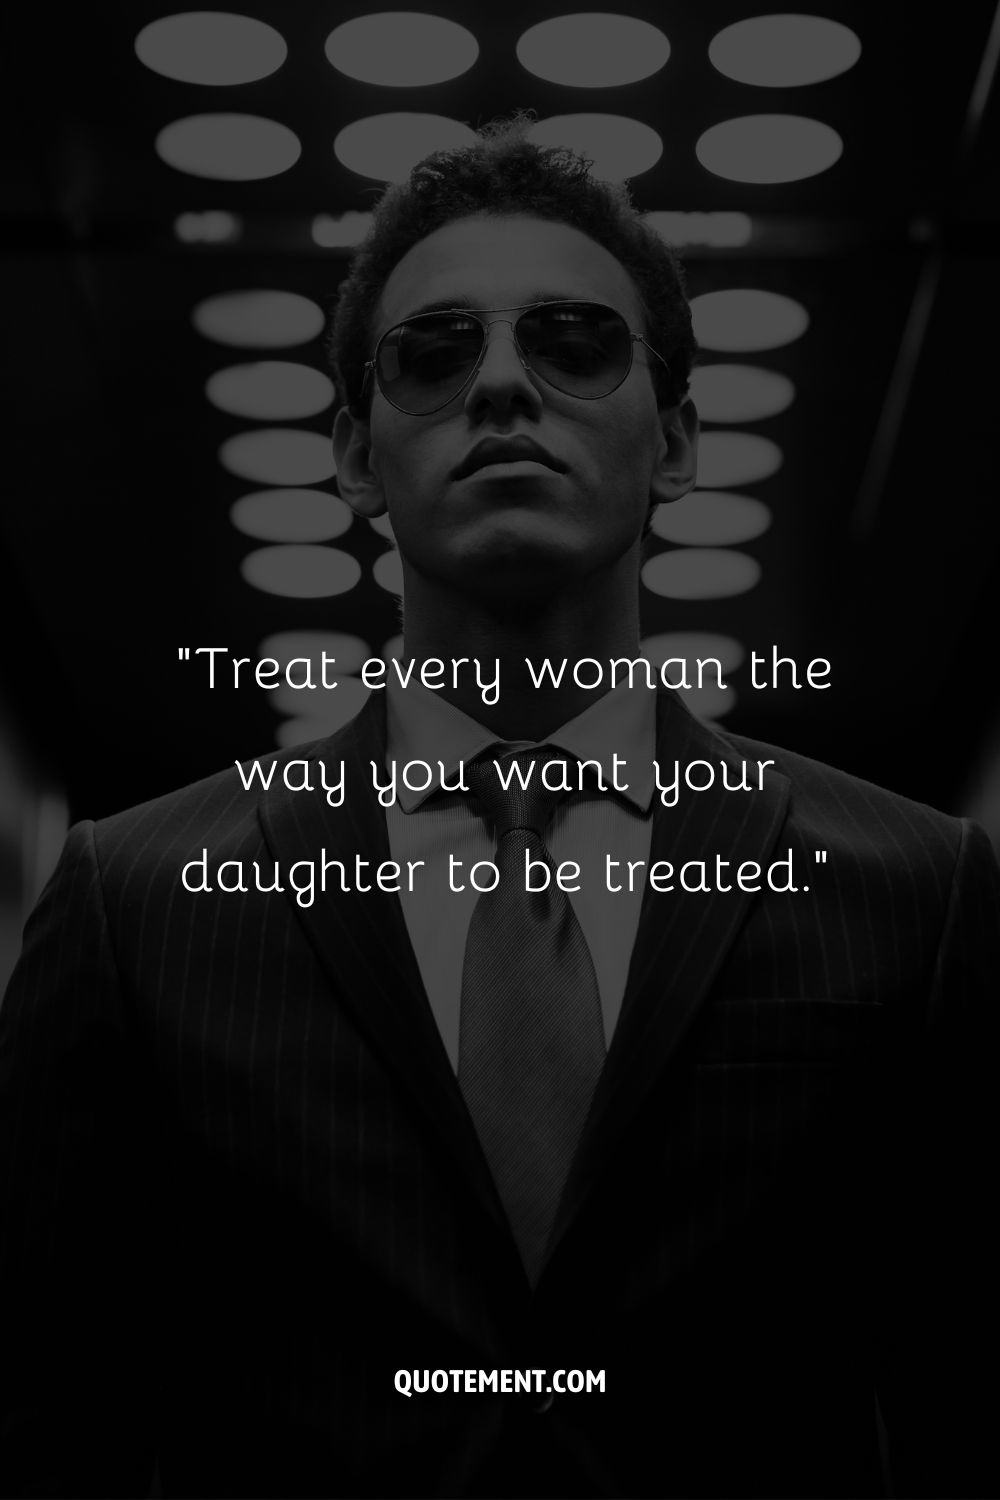 “Treat every woman the way you want your daughter to be treated.